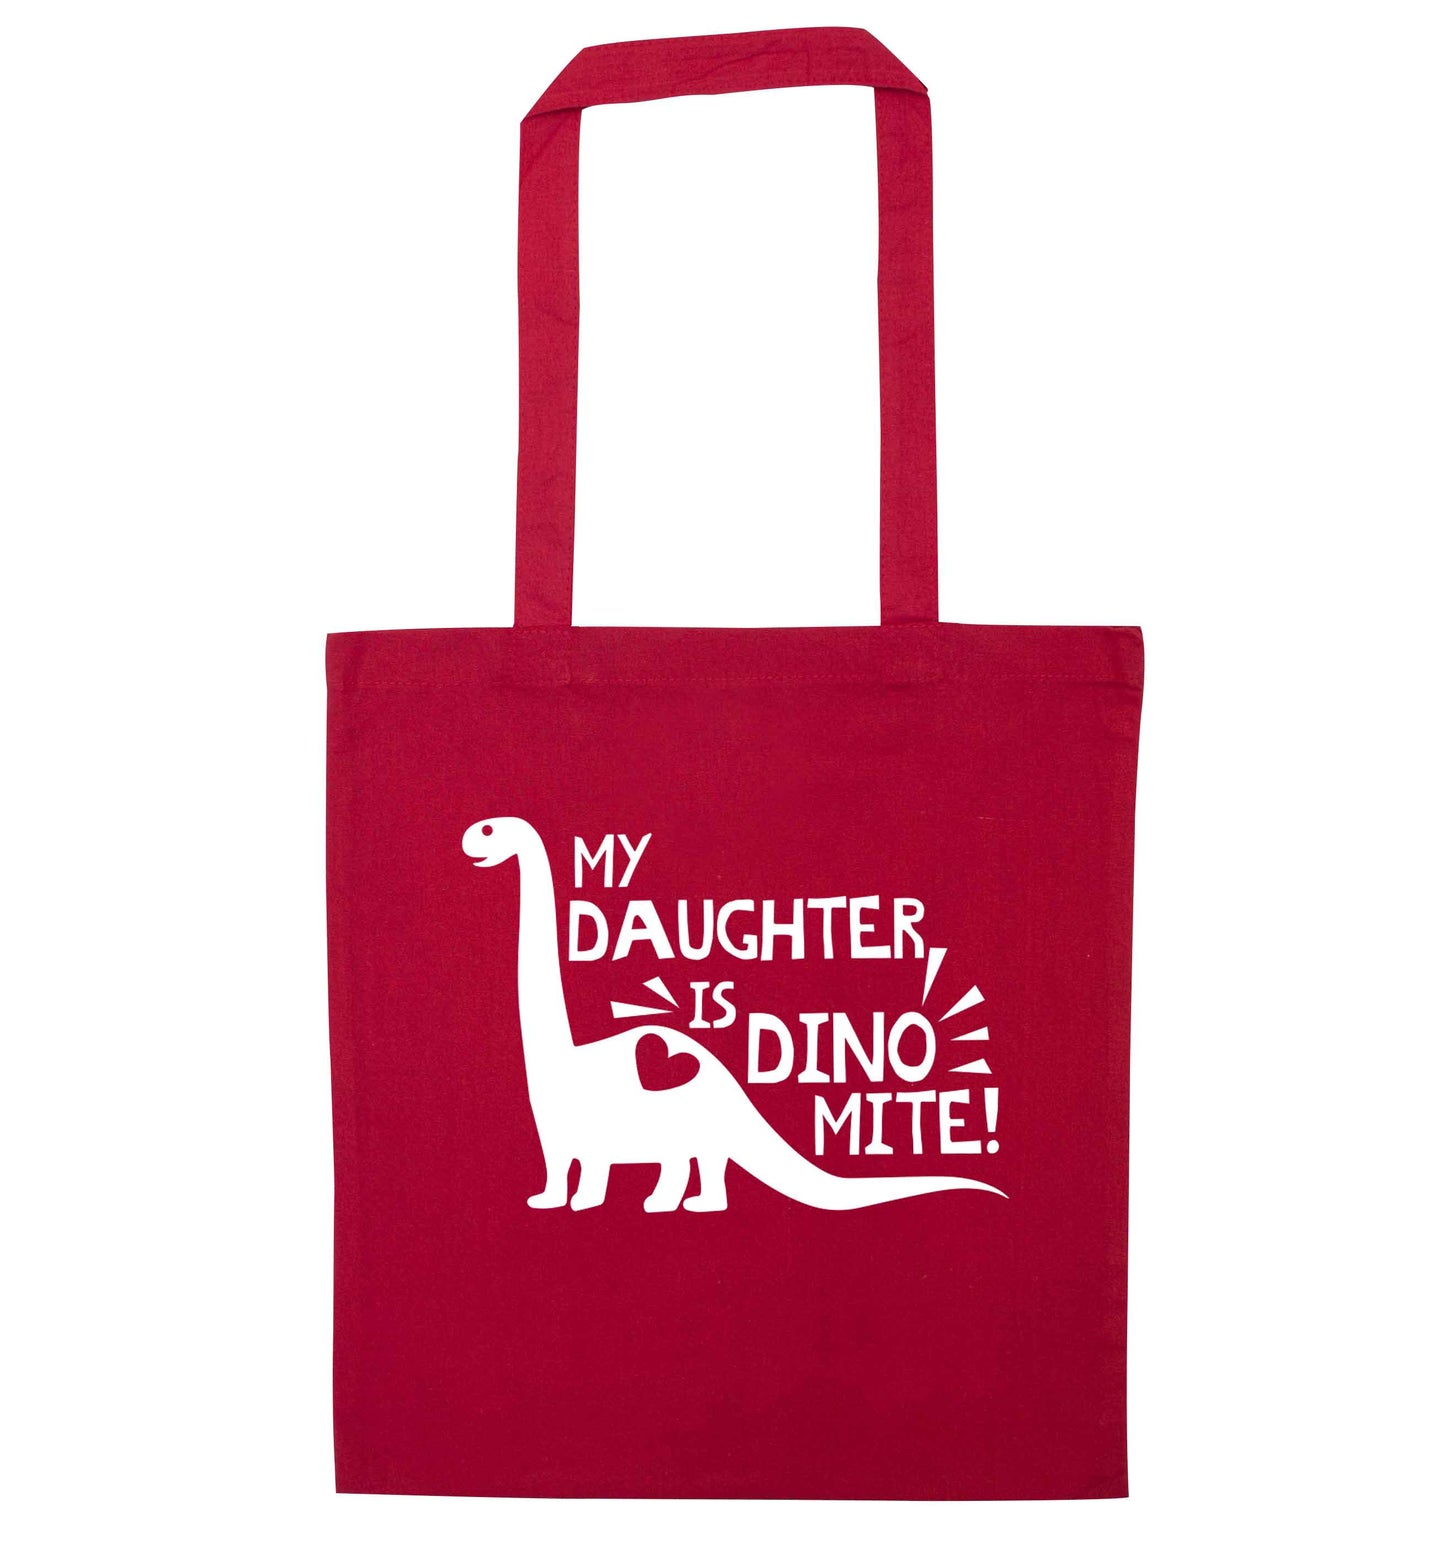 My daughter is dinomite! red tote bag